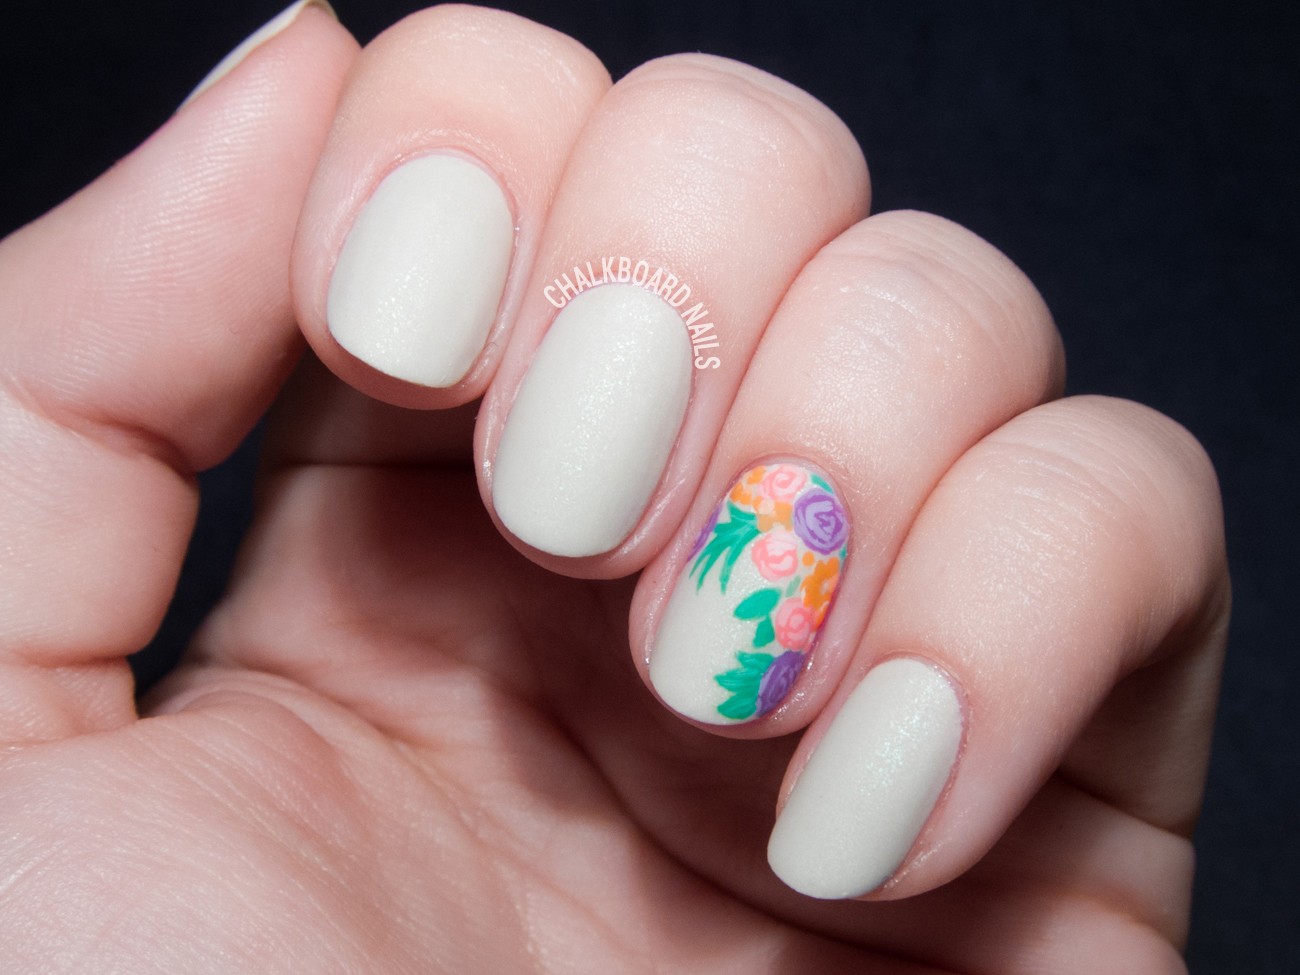 1. "Nail art with accent nail" - wide 7